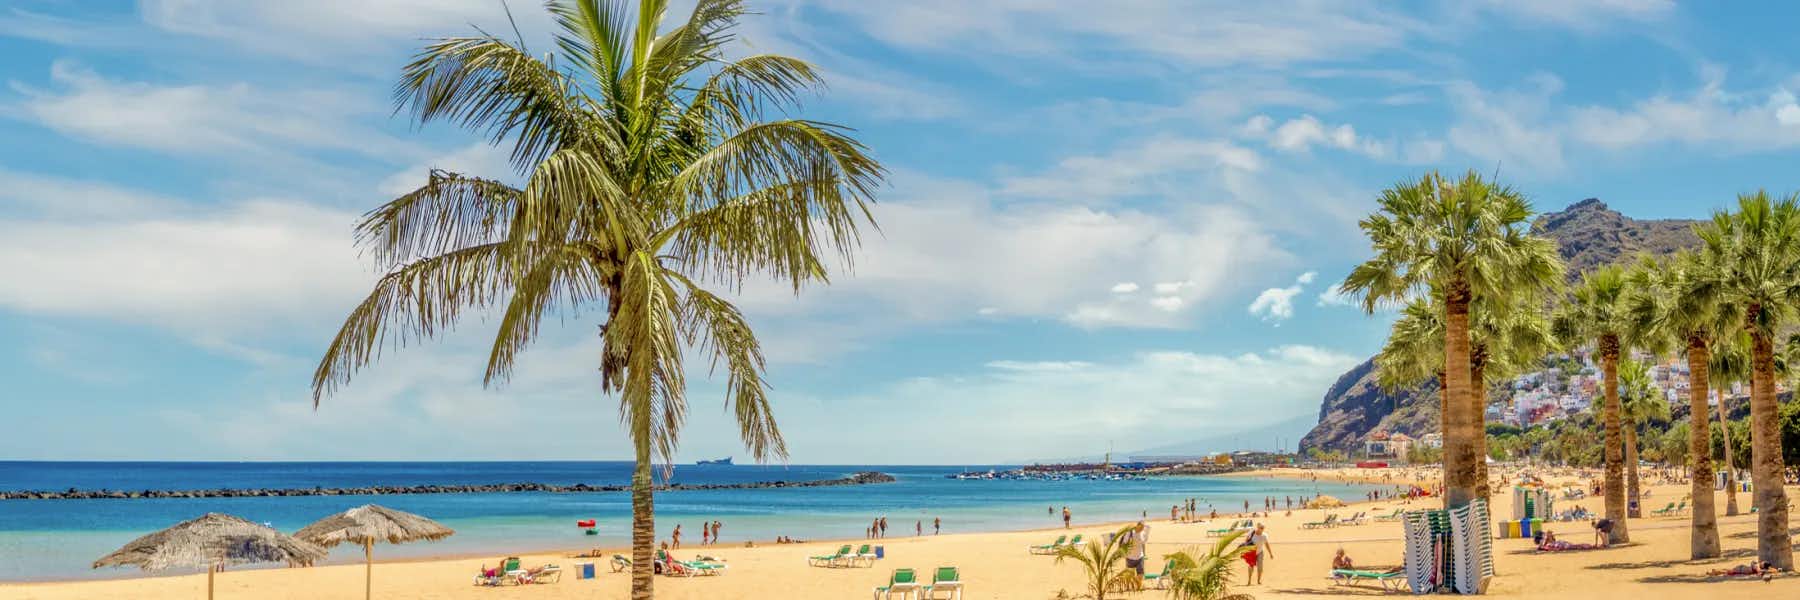 The Best Beaches in the Canary Islands